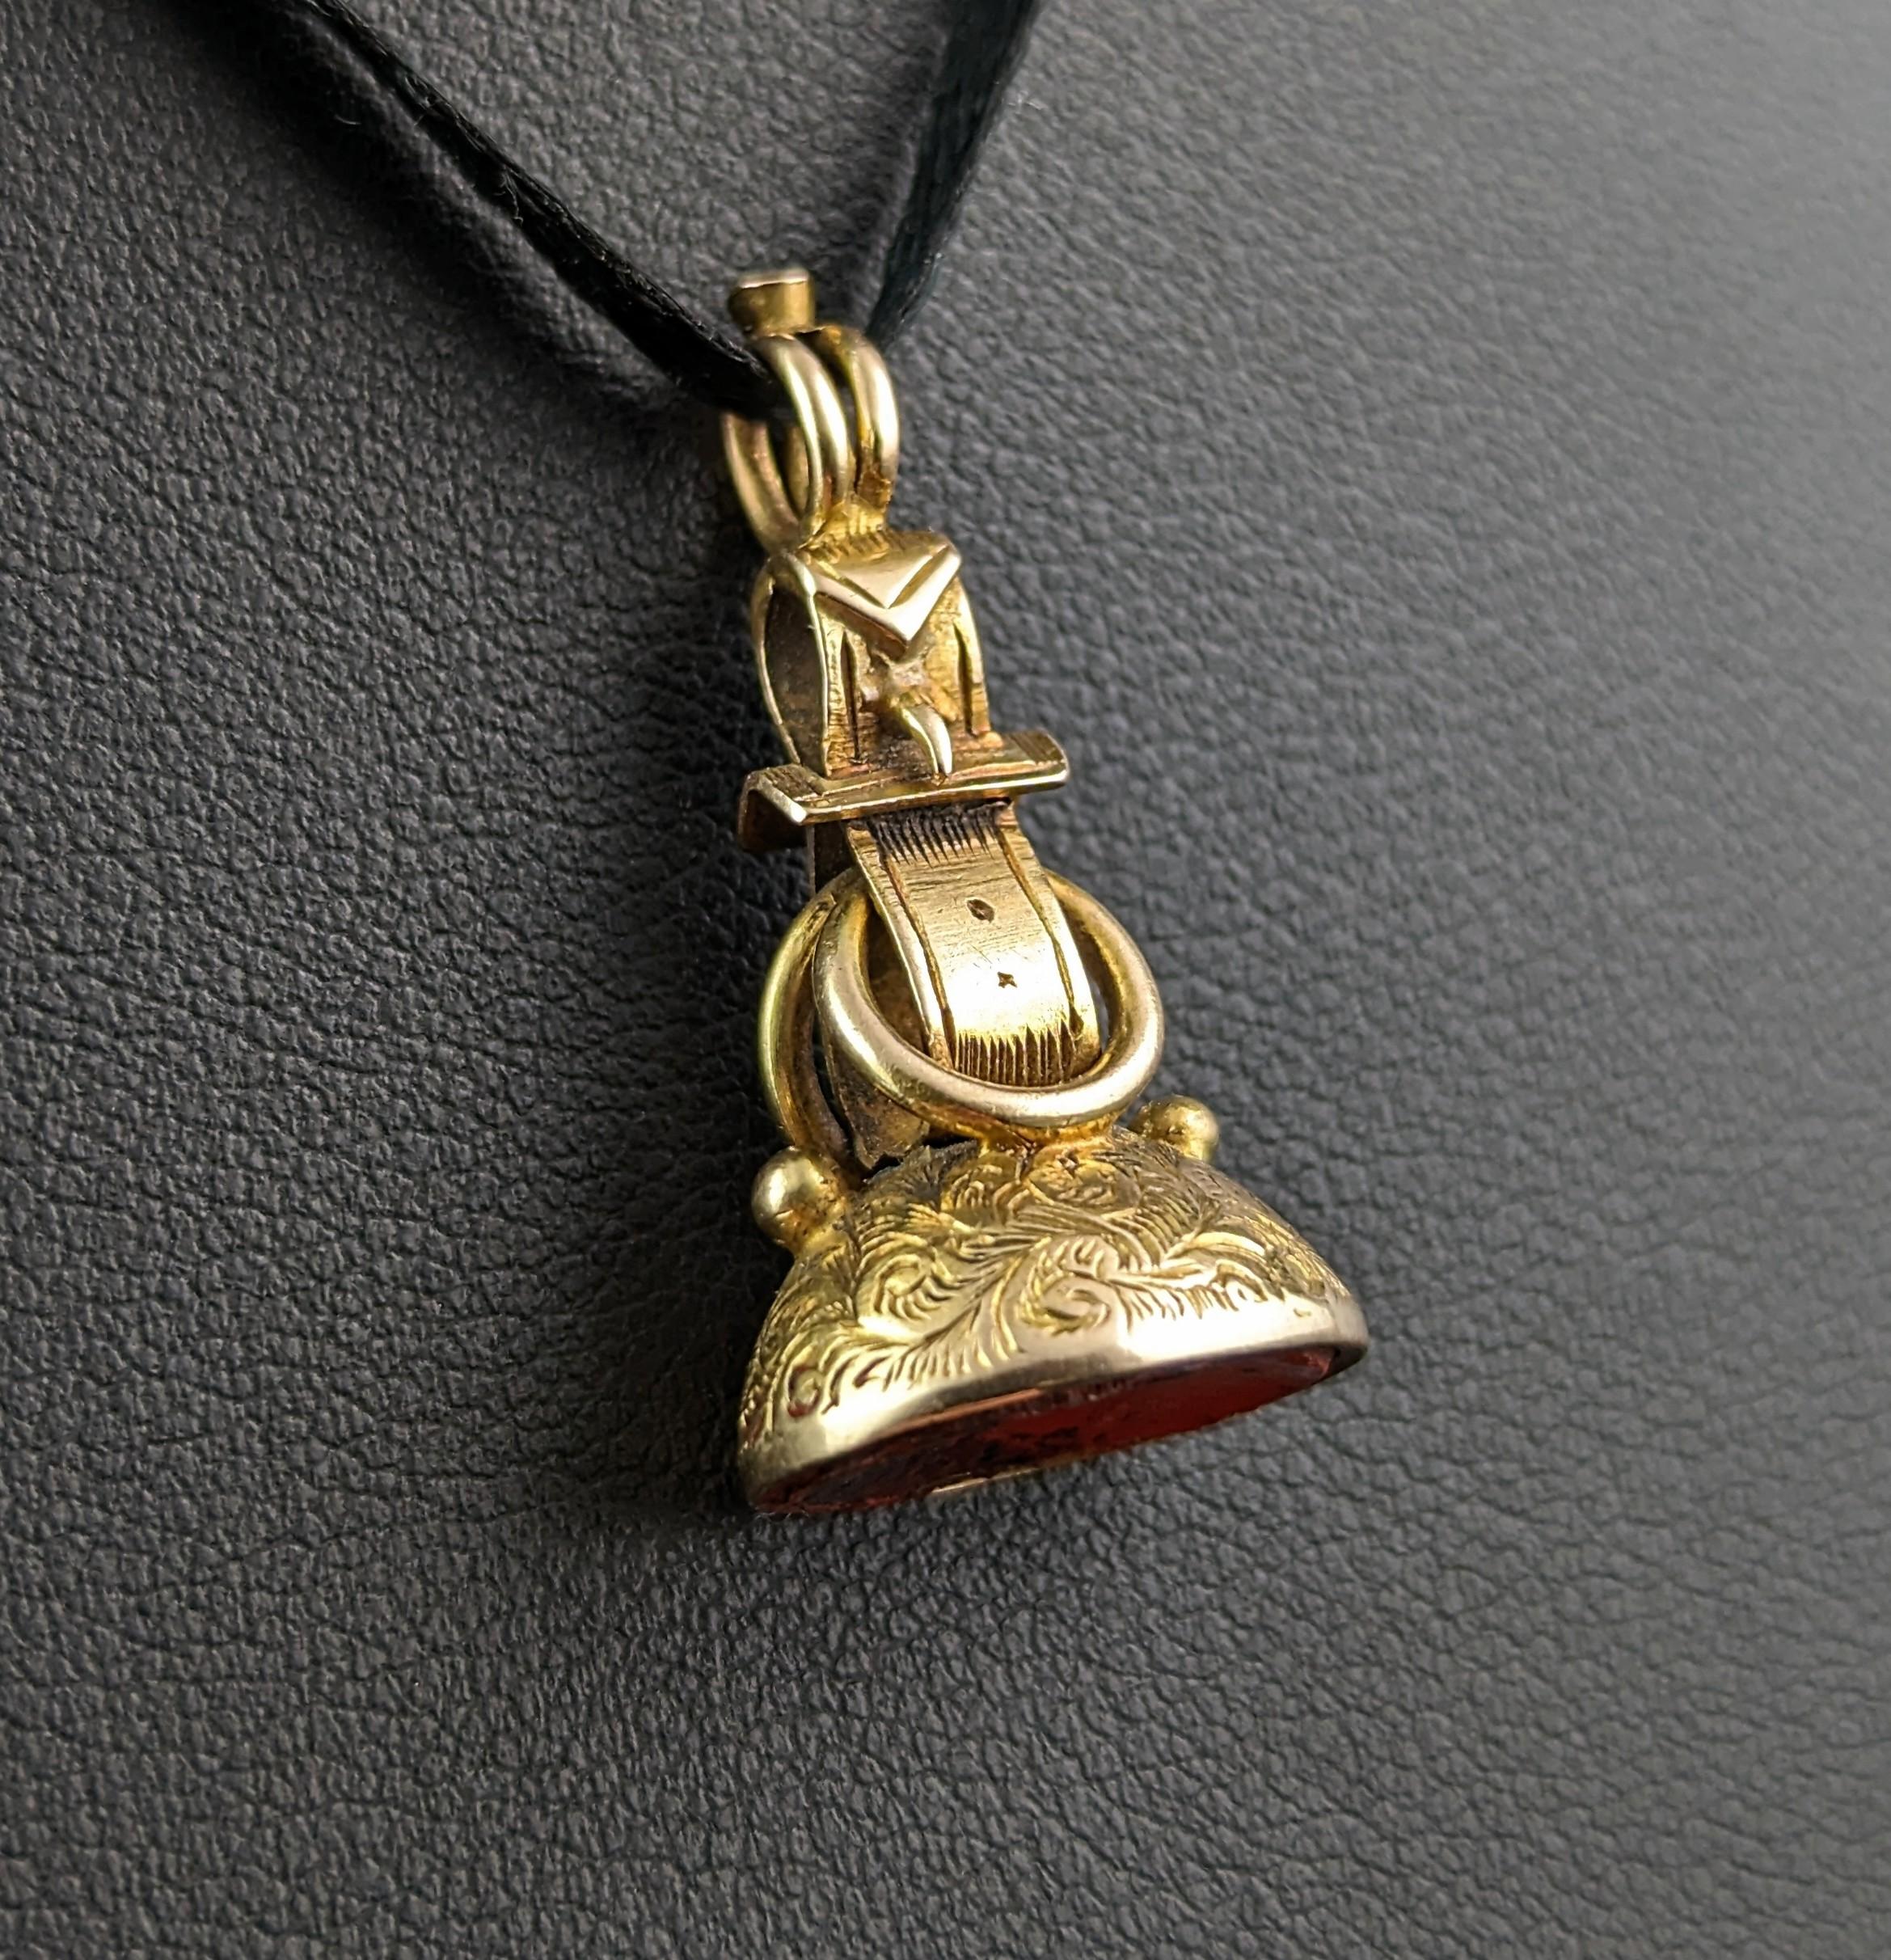 This antique 9ct gold seal fob has a wonderful and unusual design which is really very charming!

It is designed as belt and buckle with a heavily chased domed base, the attention to detail is really very good on this piece and it has been expertly